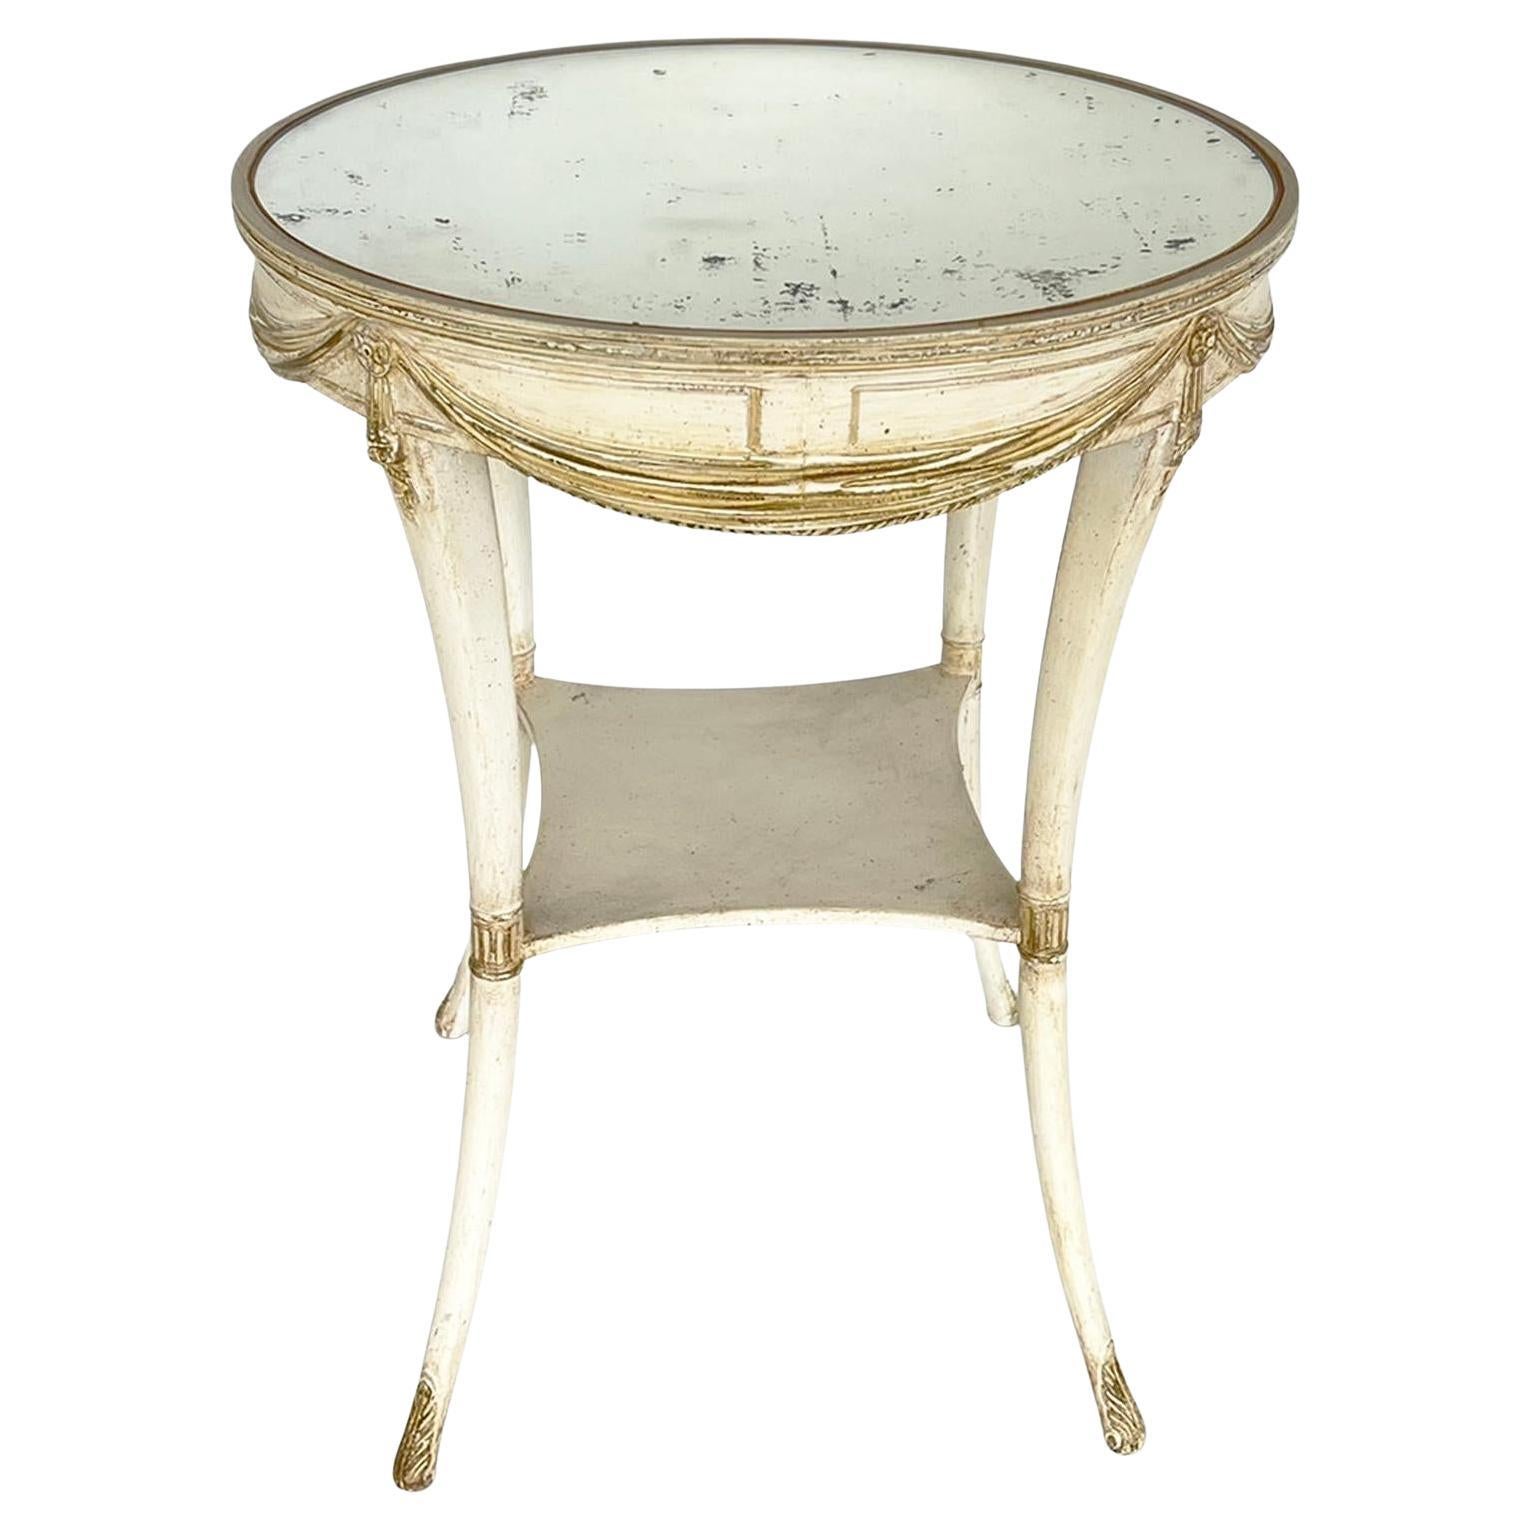 Swag-carved, Painted, Round Occasional Table with Mirrored Top by Grosfeld House For Sale